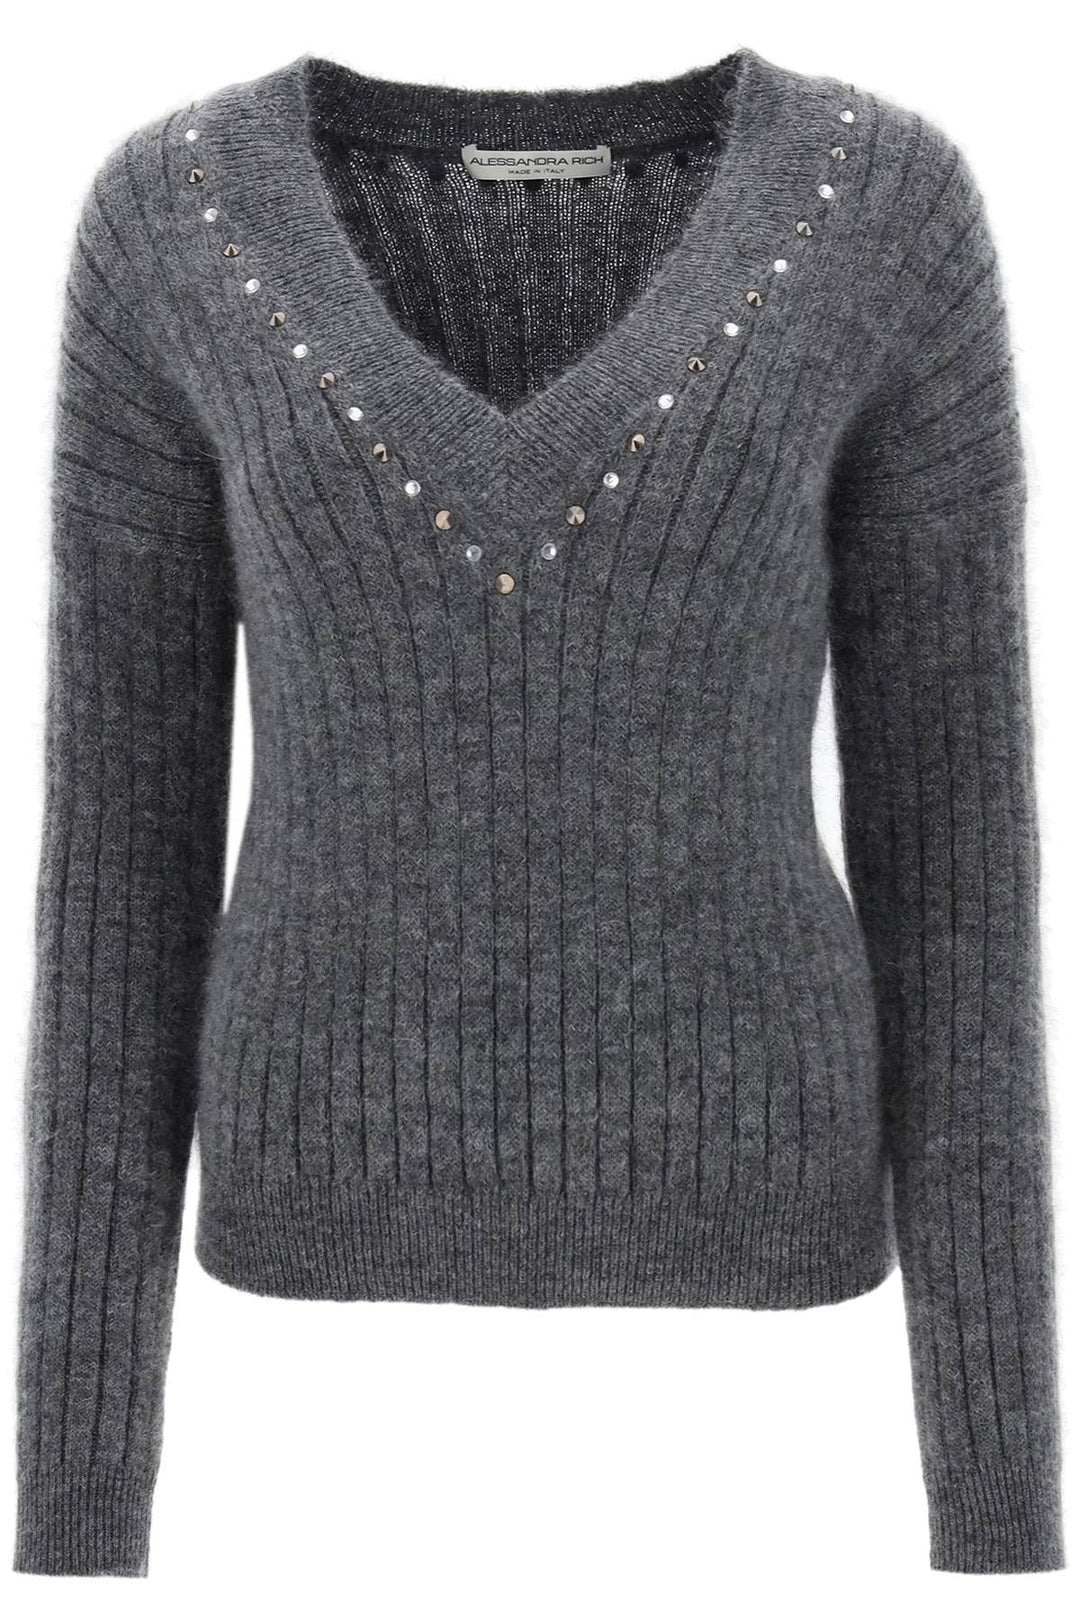 Alessandra Rich Wool Knit Sweater With Studs And Crystals   Grigio